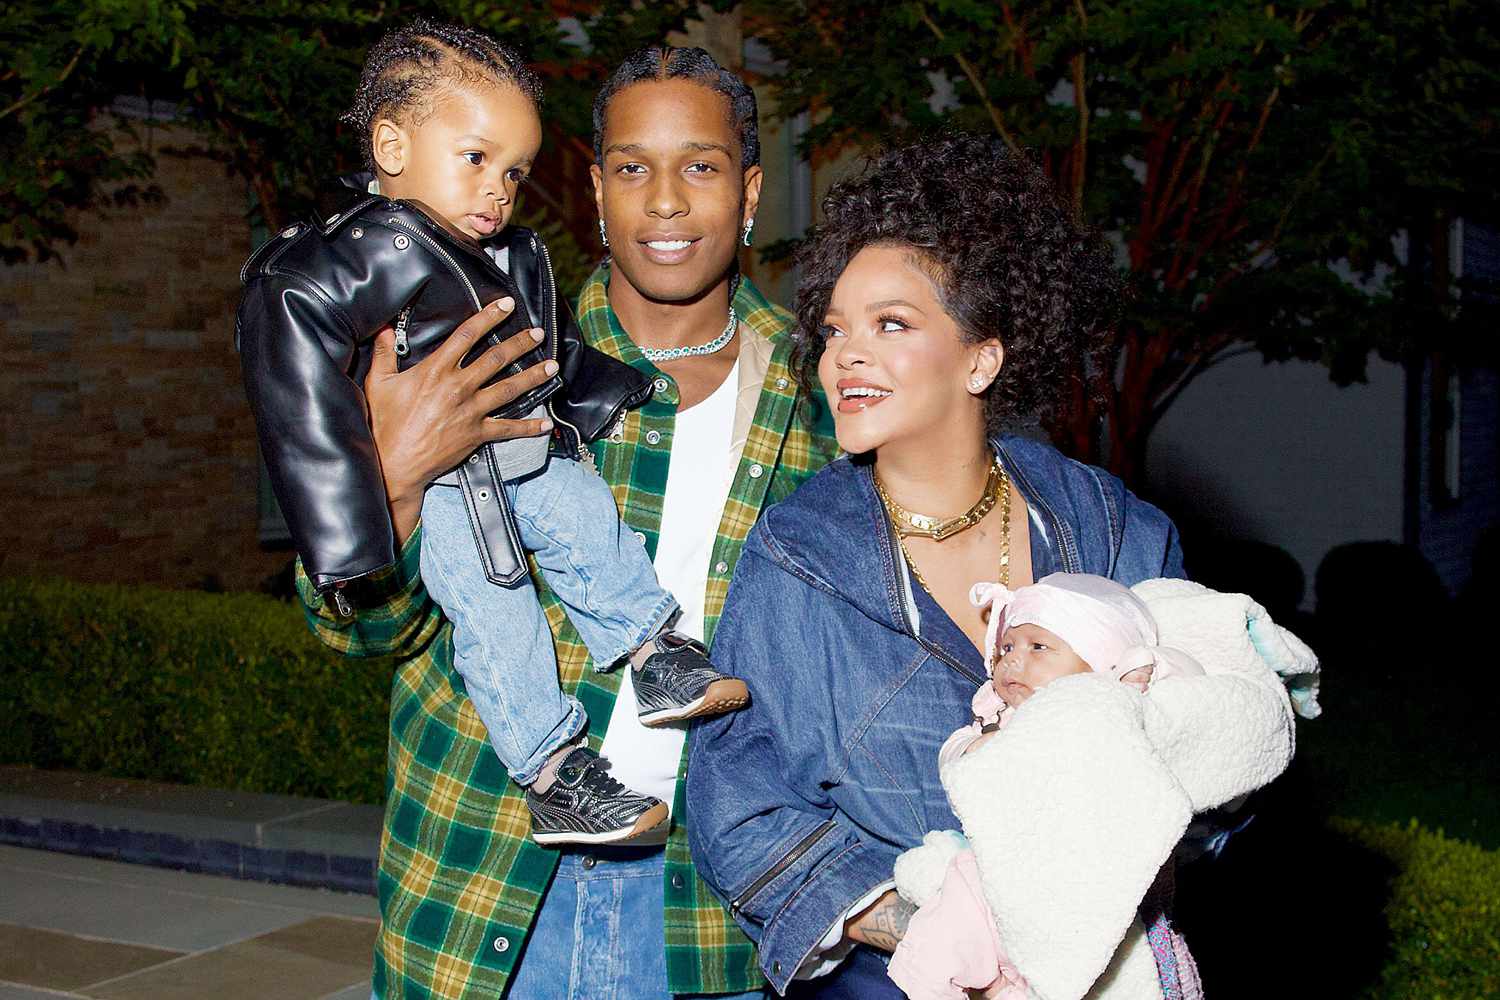 Rihanna and ASAP Rocky are sharing with the world an intimate photoshoot along with their newborn son, Riot Rose